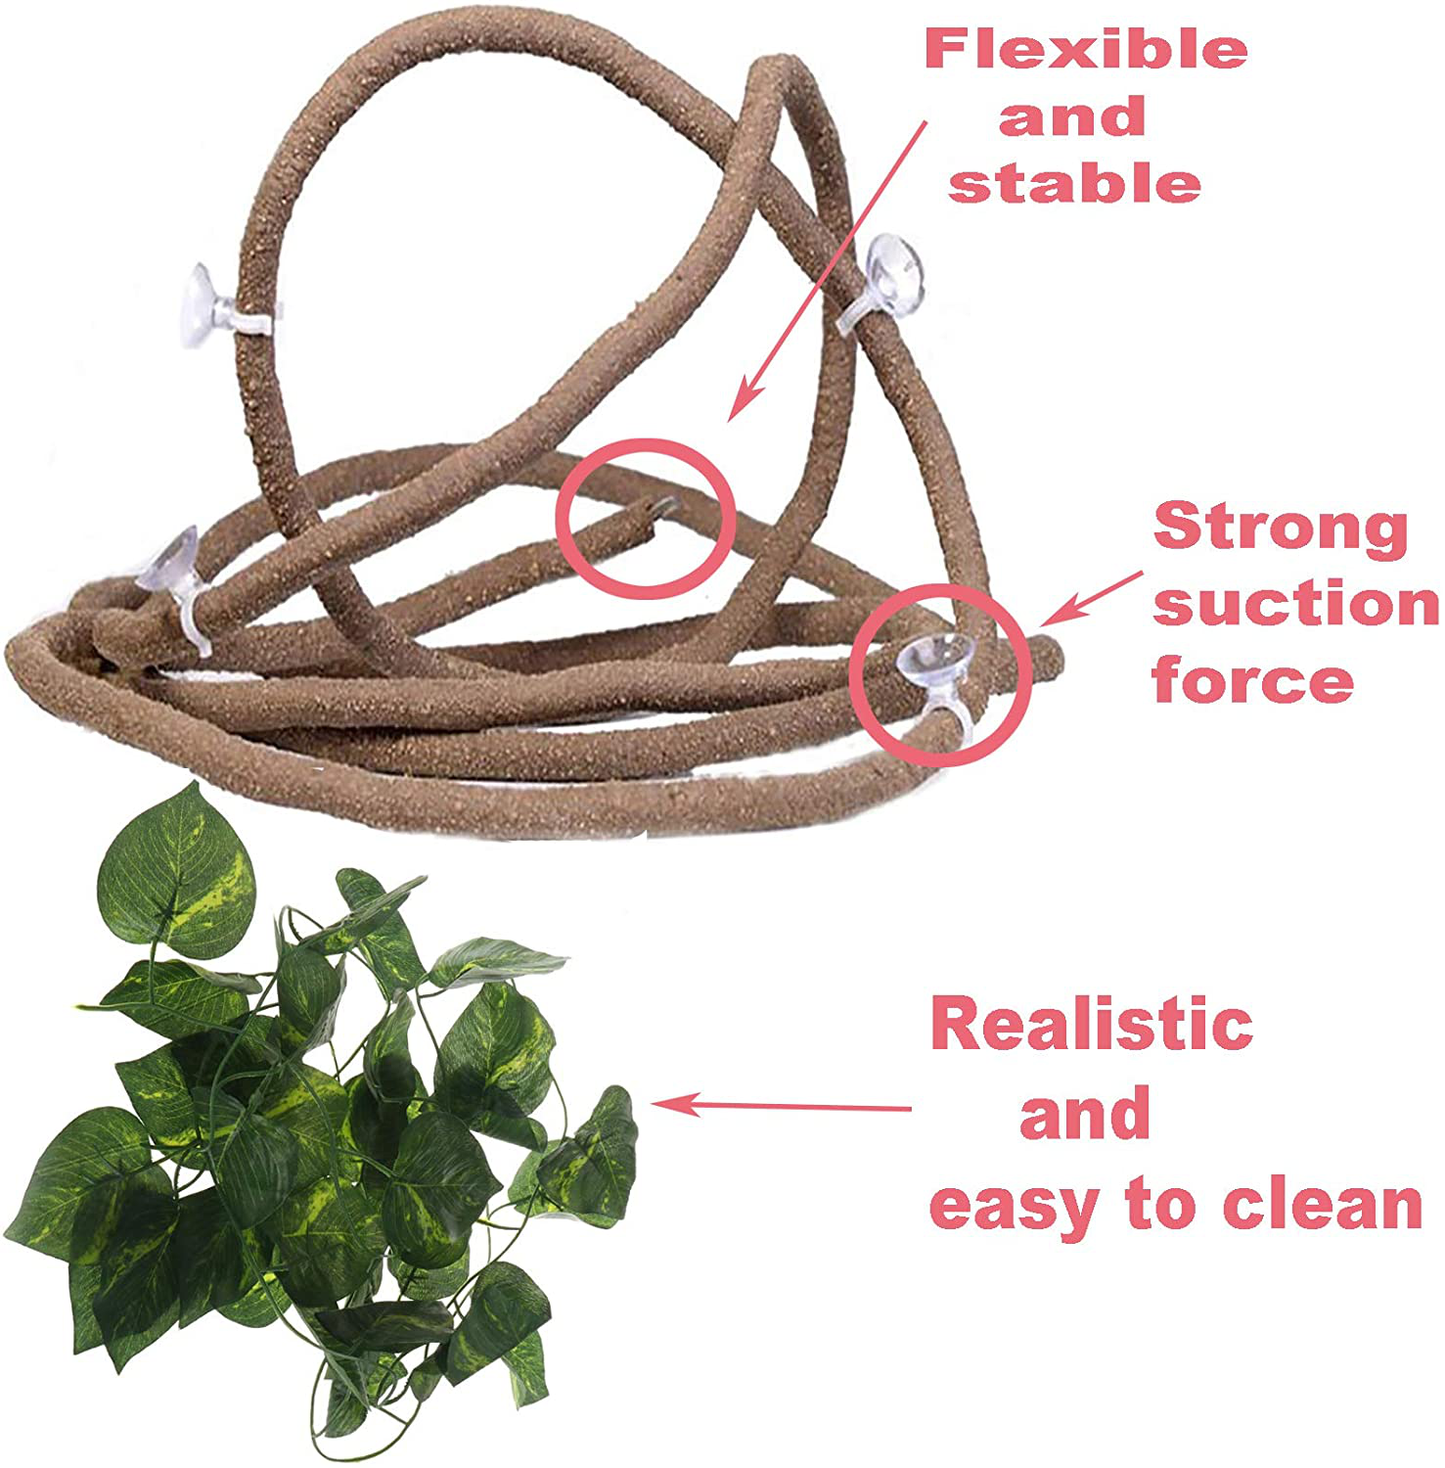 Tfwadmx Reptiles Jungle Vines Bend a Branch Ivy 4Pcs Artificial Fake Leaves Habitat Ornaments for Chameleons, Snakes, Lizards, Frogs Animals & Pet Supplies > Pet Supplies > Reptile & Amphibian Supplies > Reptile & Amphibian Habitat Accessories Tfwadmx   